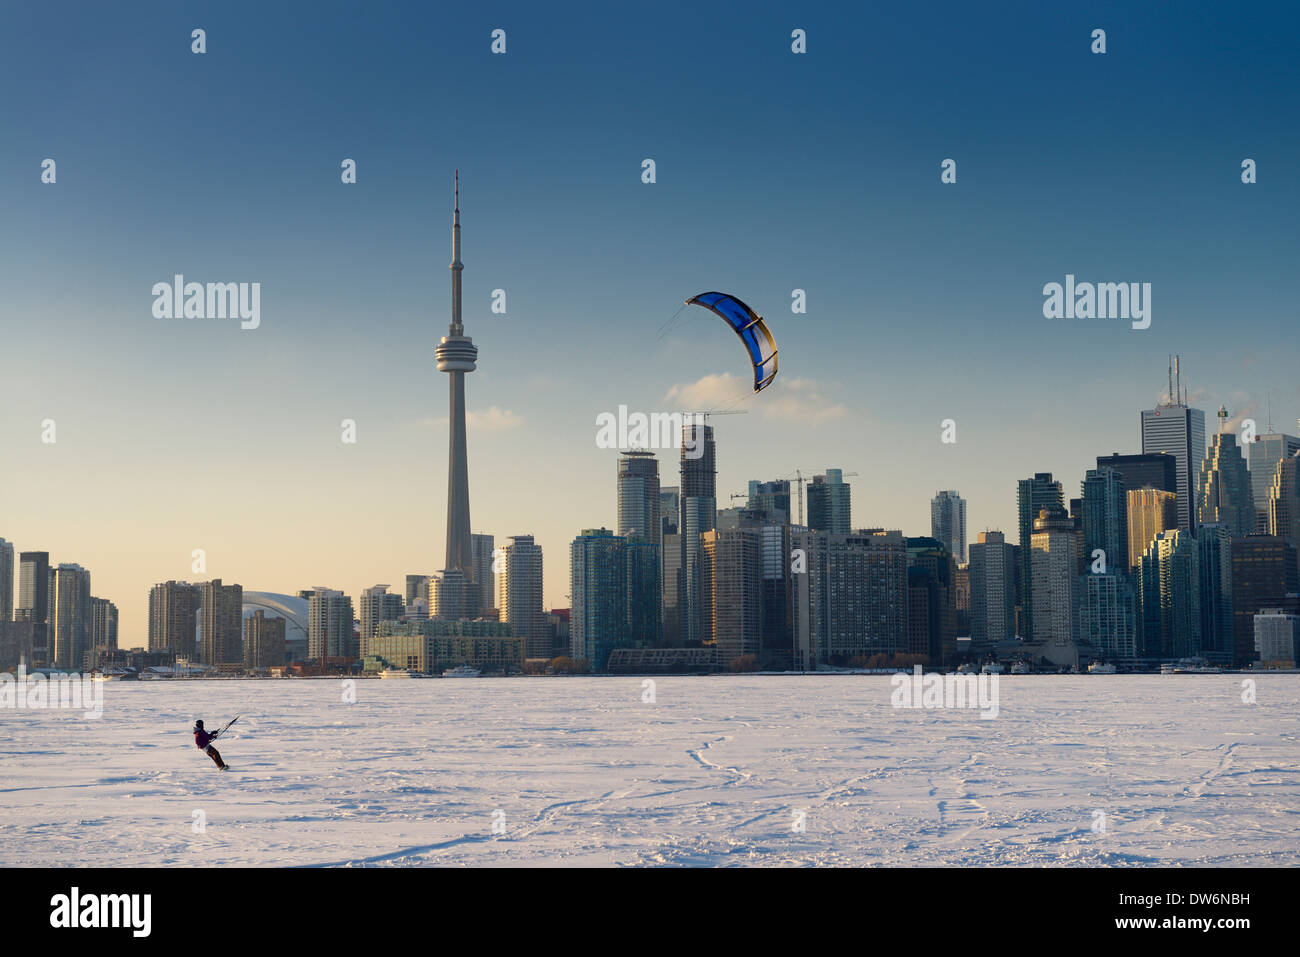 Young man parasail snowboarding on frozen Lake Ontario with Toronto city skyline in winter Stock Photo